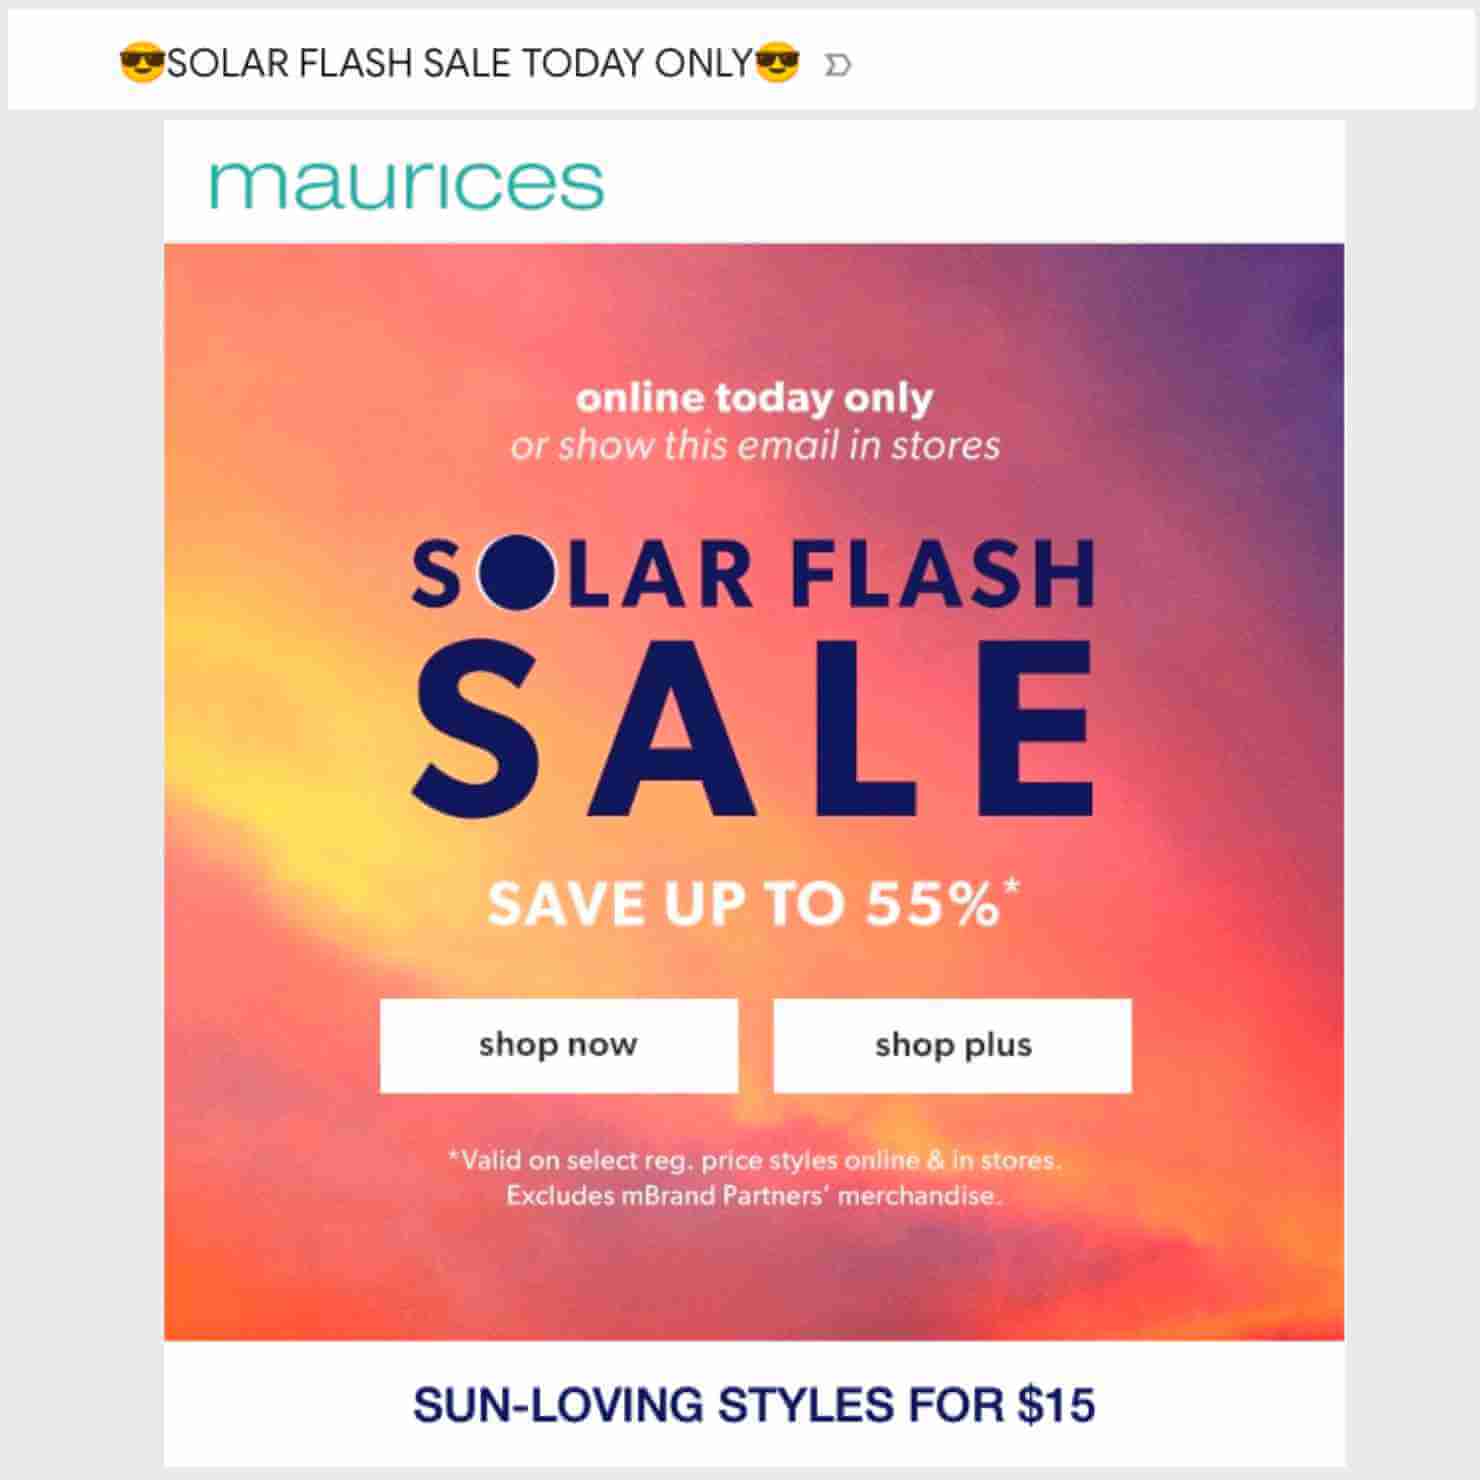 Flash sale example from Maurices. The email subject line says "Solar Flash Sale Today Only (sunglasses emoji at beginning and end." Email content includes "Solar Flash Sale" with the O in Solar looking like a solar eclipse. "Save up to 55%" Buttons say "Shop now" and "Shop plus." A heading at the bottom says "Sun-loving styles for $15," indicating that you can scroll to see examples of products on sale.